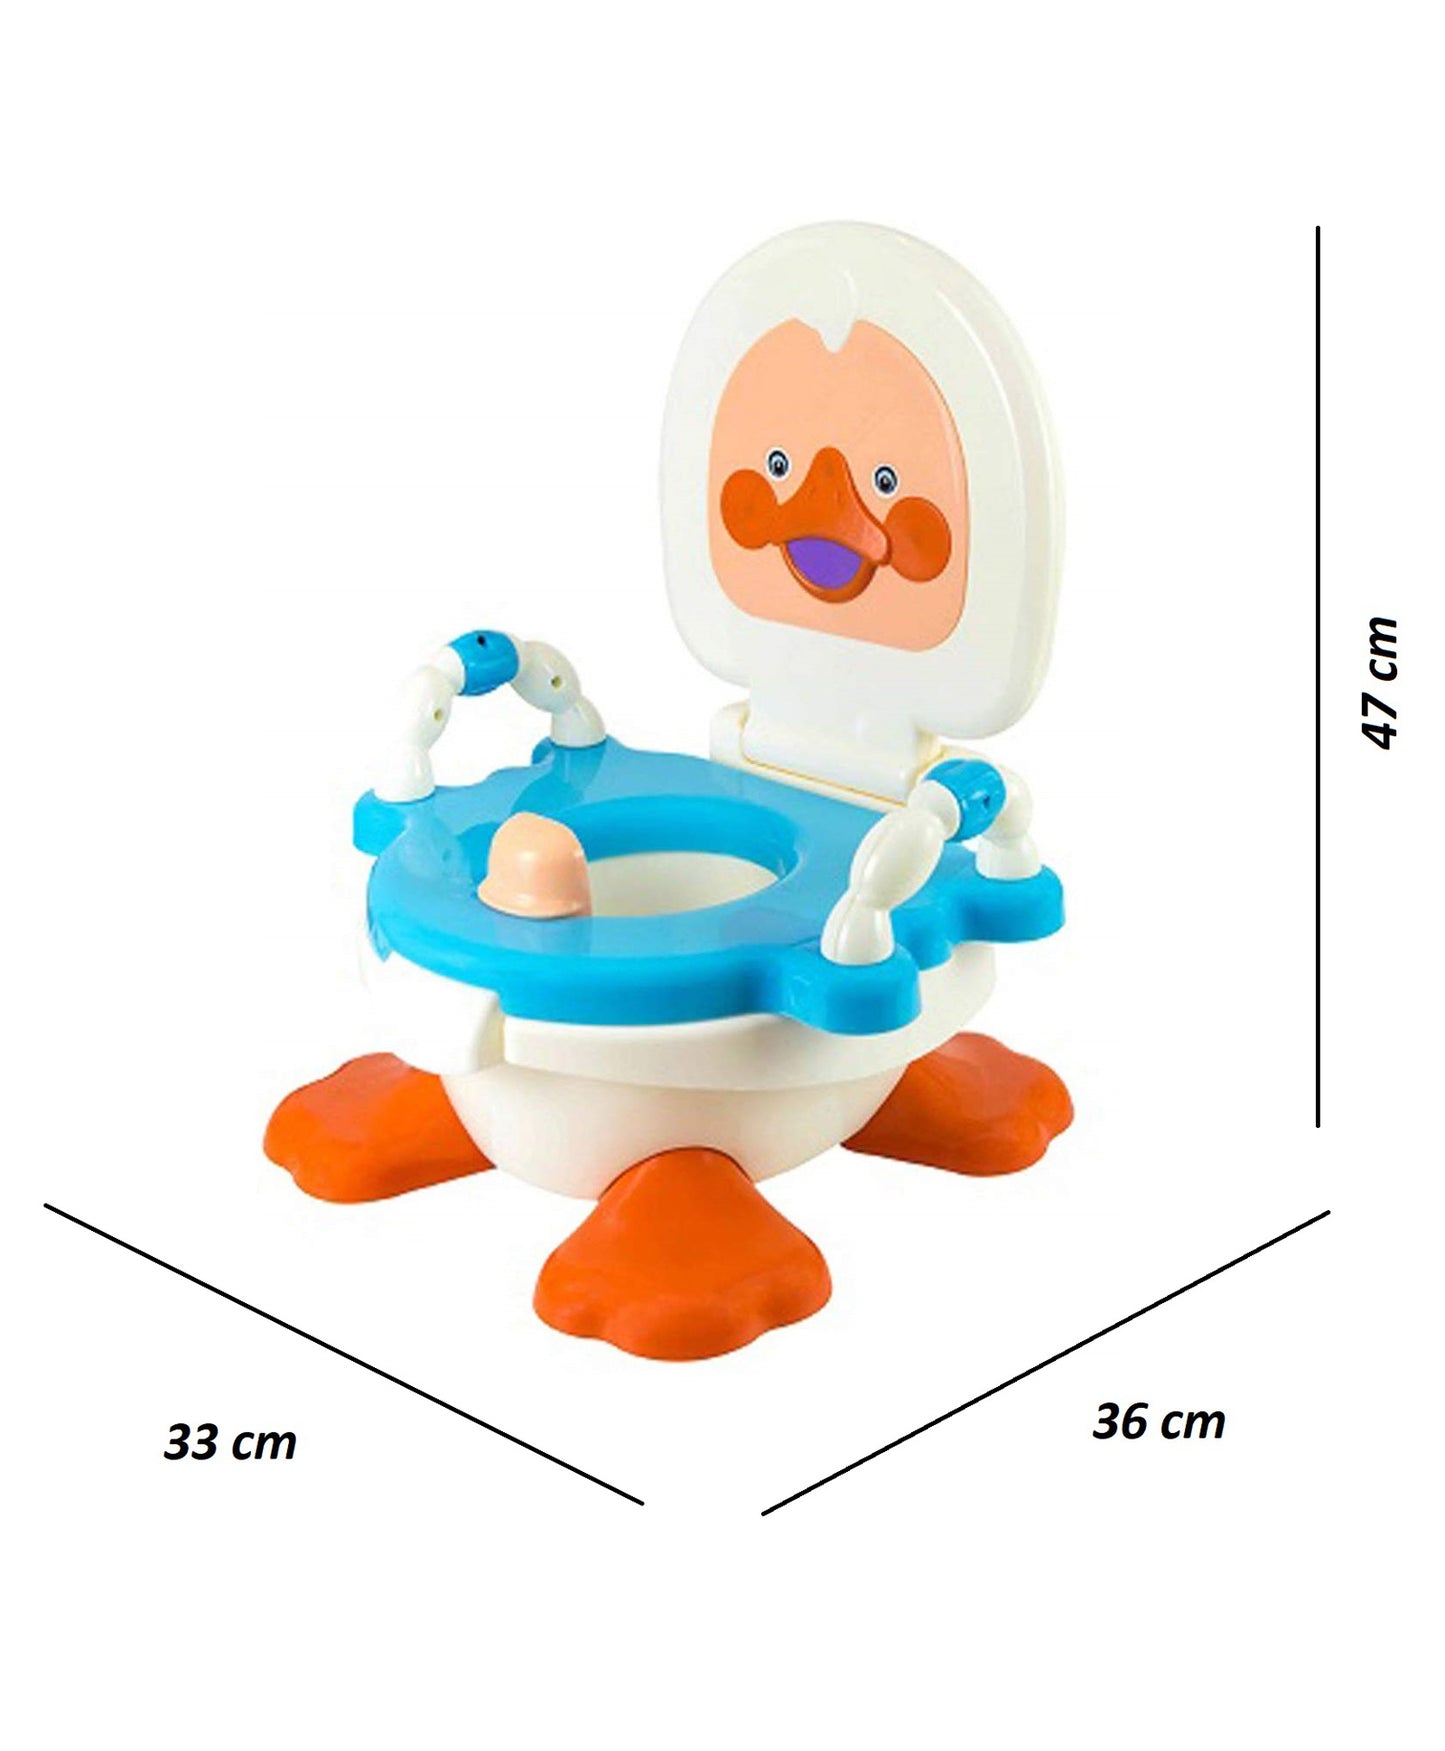 MM TOYS Panda Duck Potty Training Seat with Removable Bowl and Closable Cover - Blue